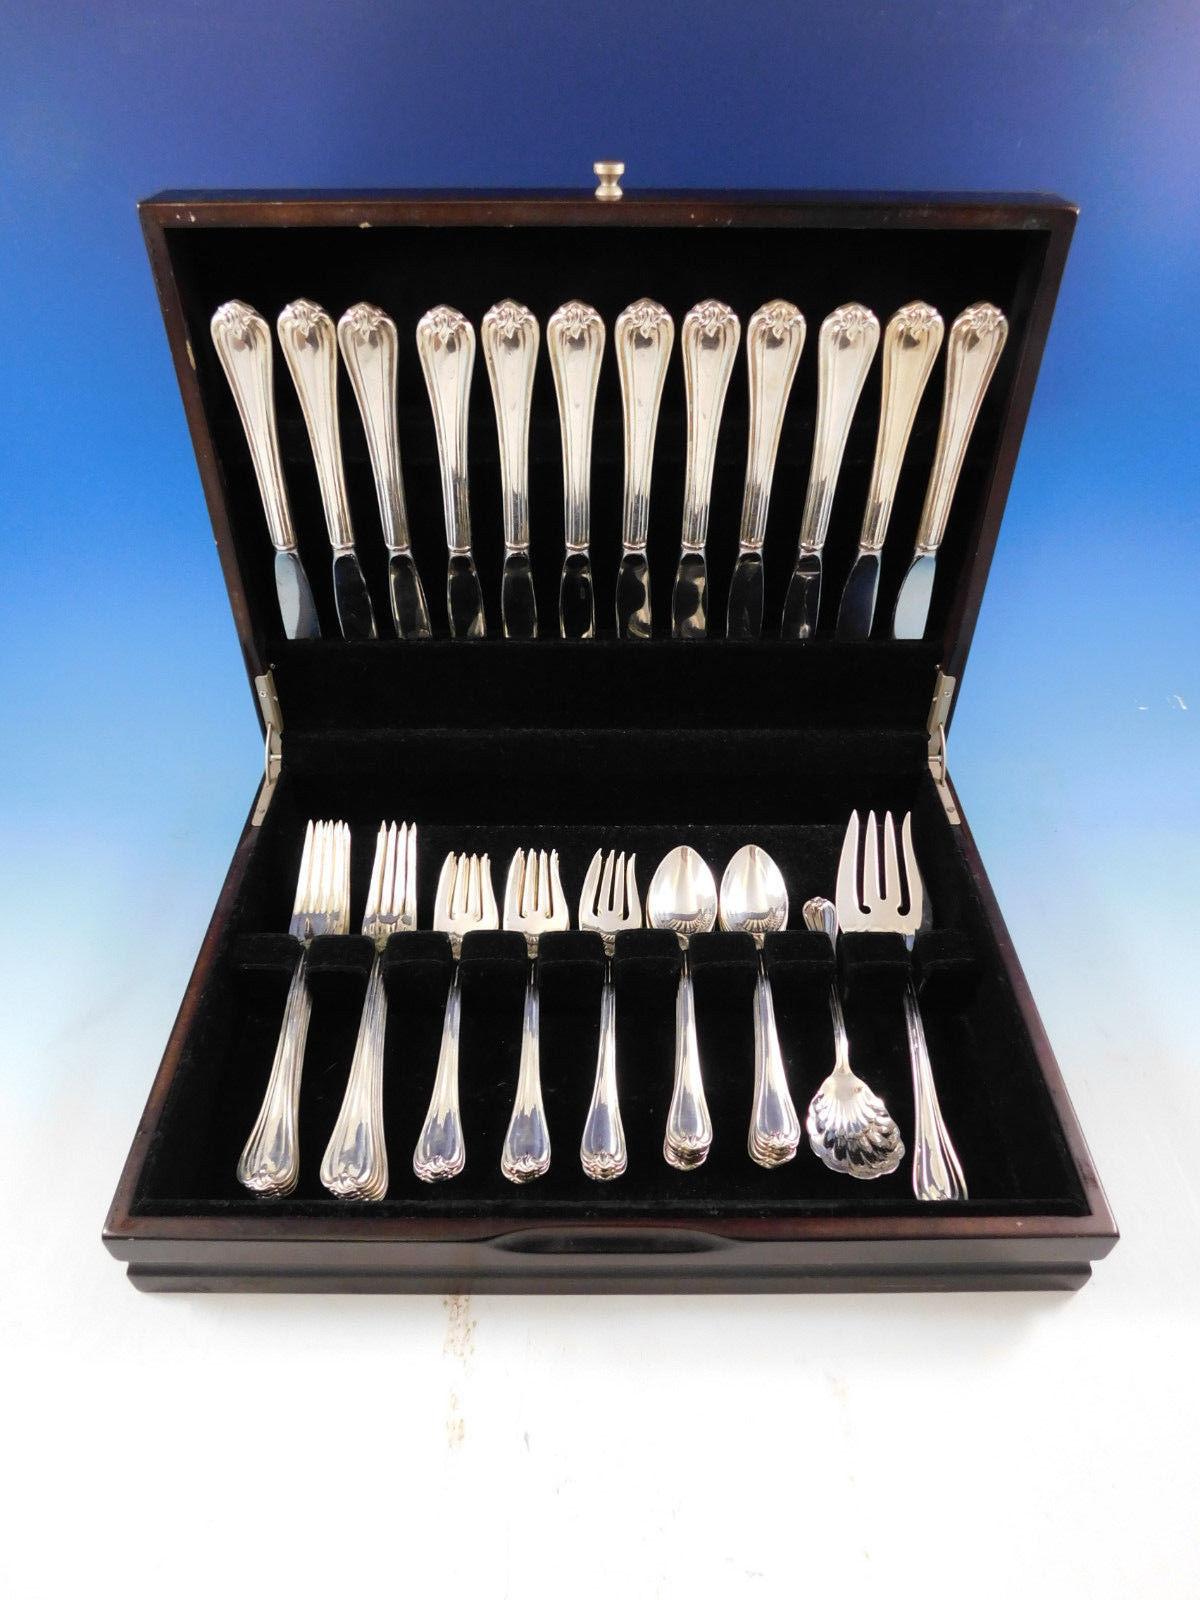 Woodwind by Reed & Barton sterling silver Flatware set, 50 pieces. This set includes:

12 knives, 9